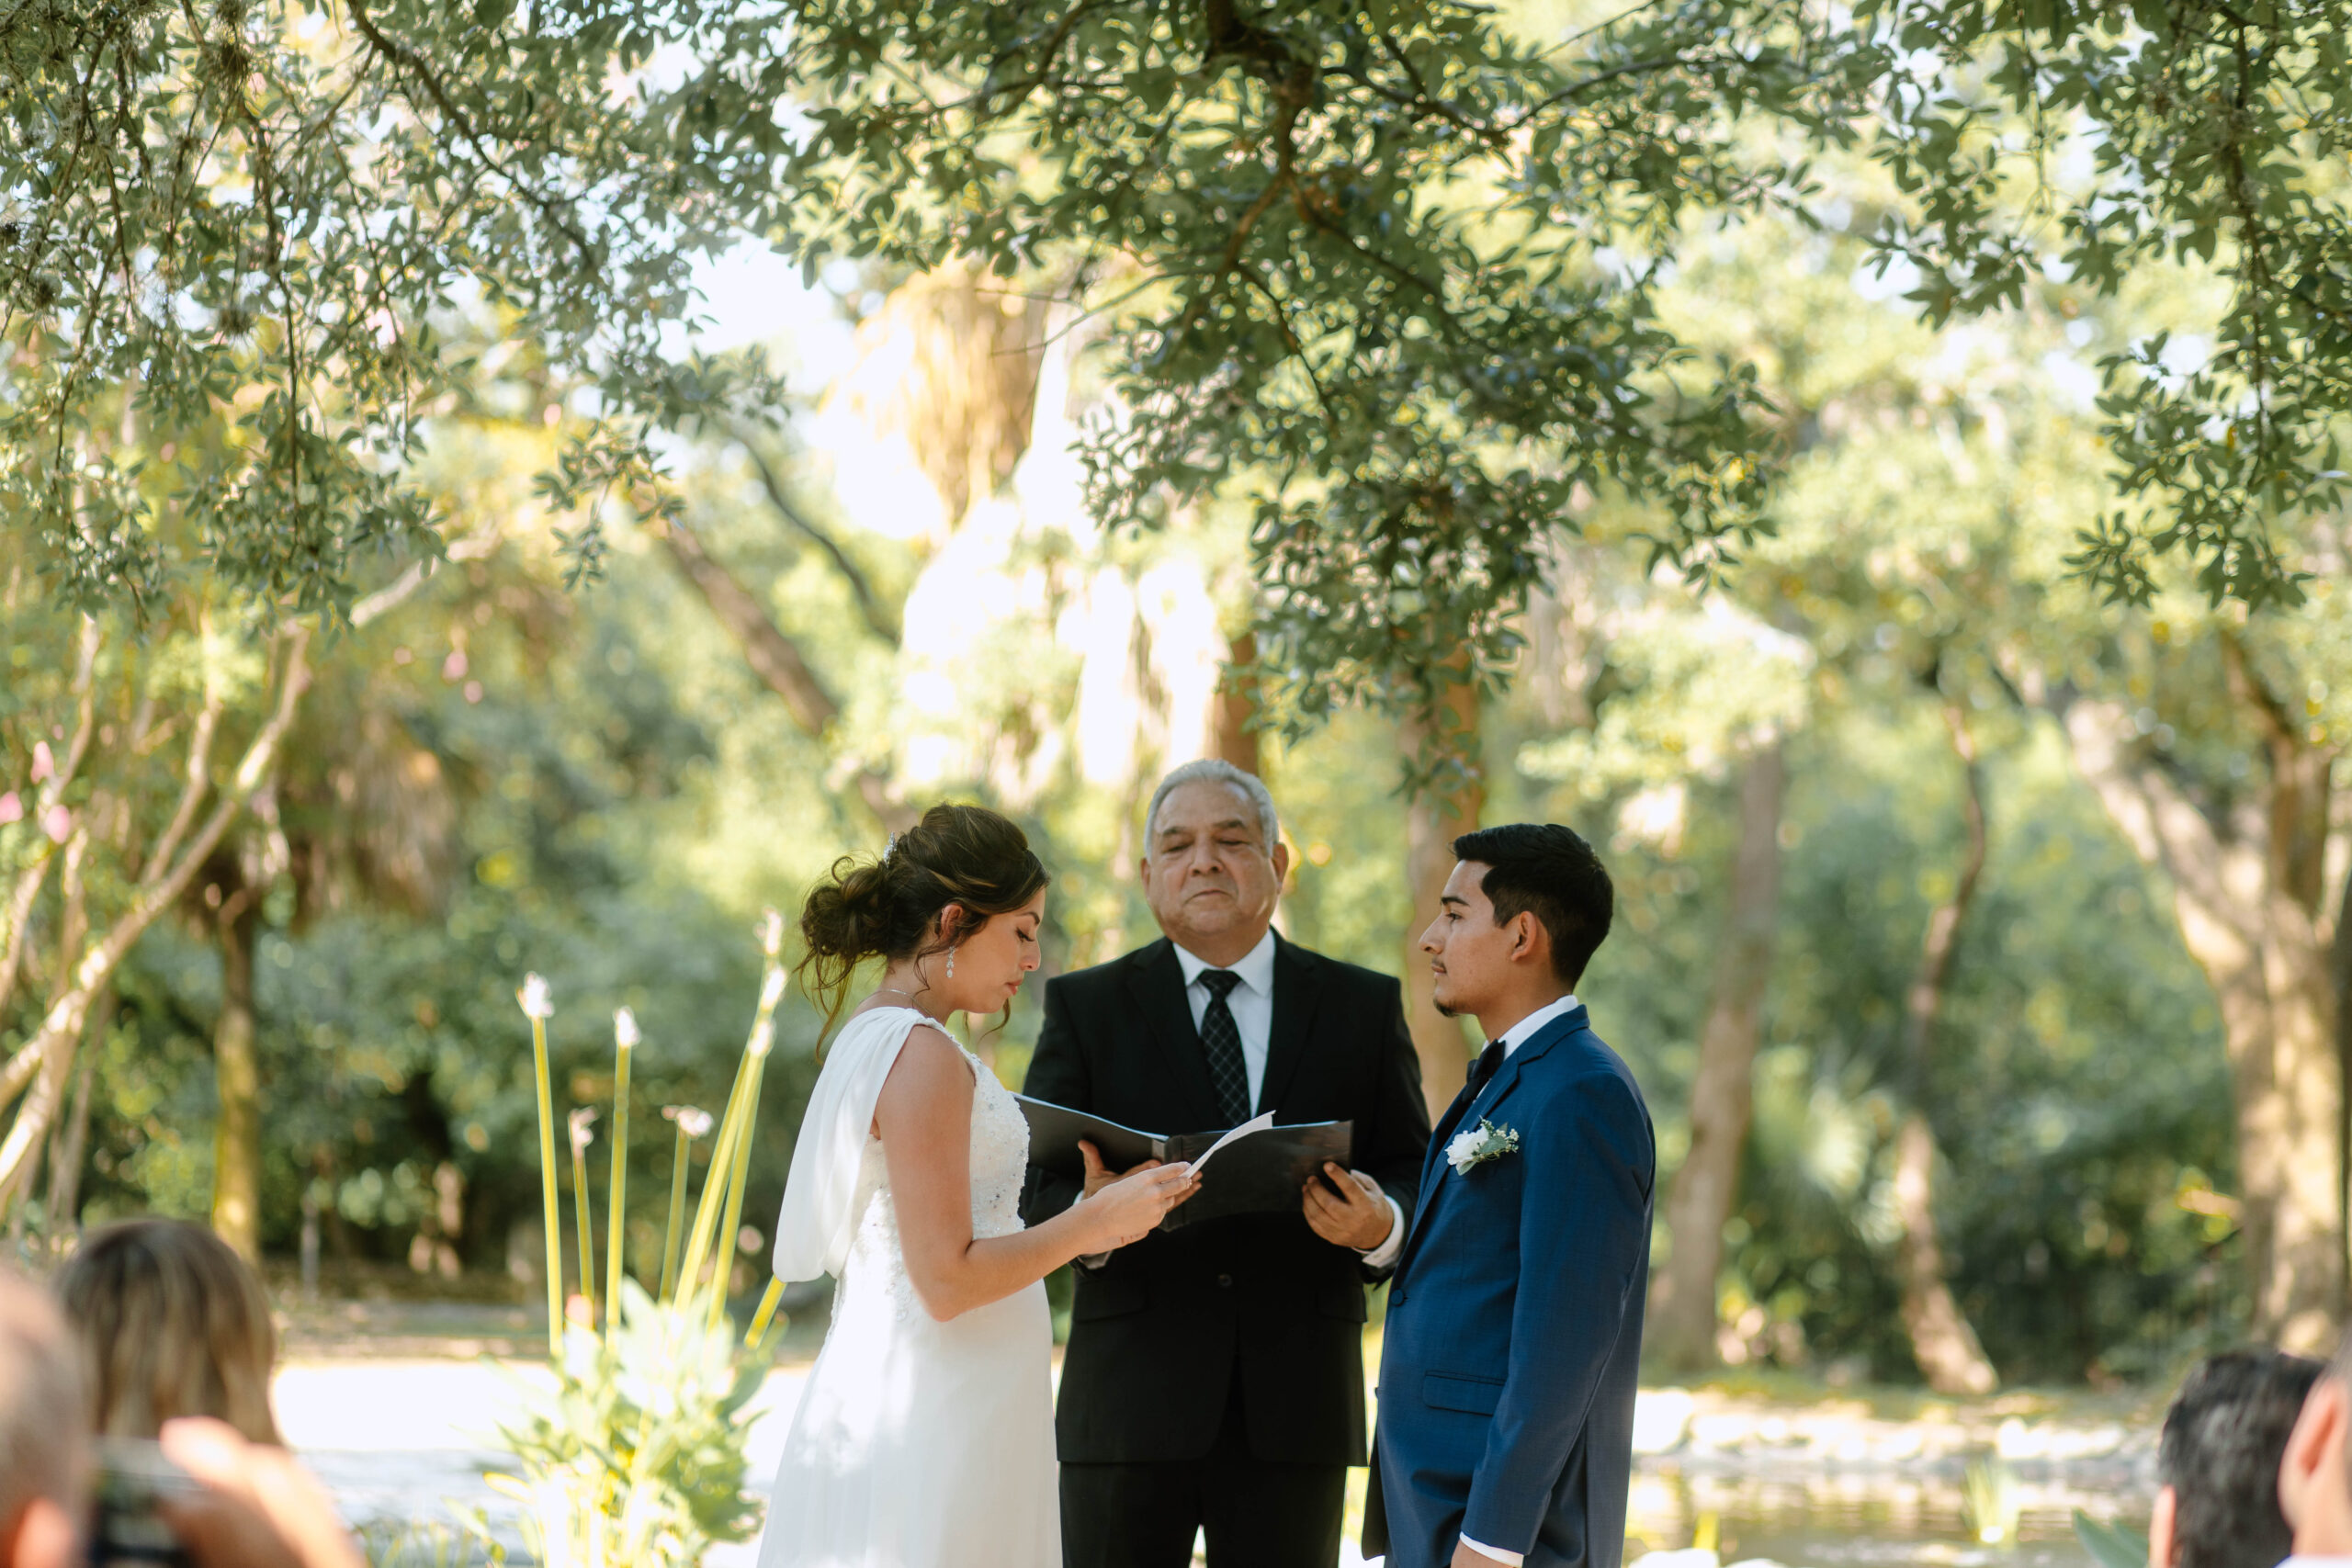 Couple exchanging vows with Ceremony Wedding Photography at Mayfield Gardens. Photograph by Bare Moments Photography. Taken during the summer in Austin, Texas. 